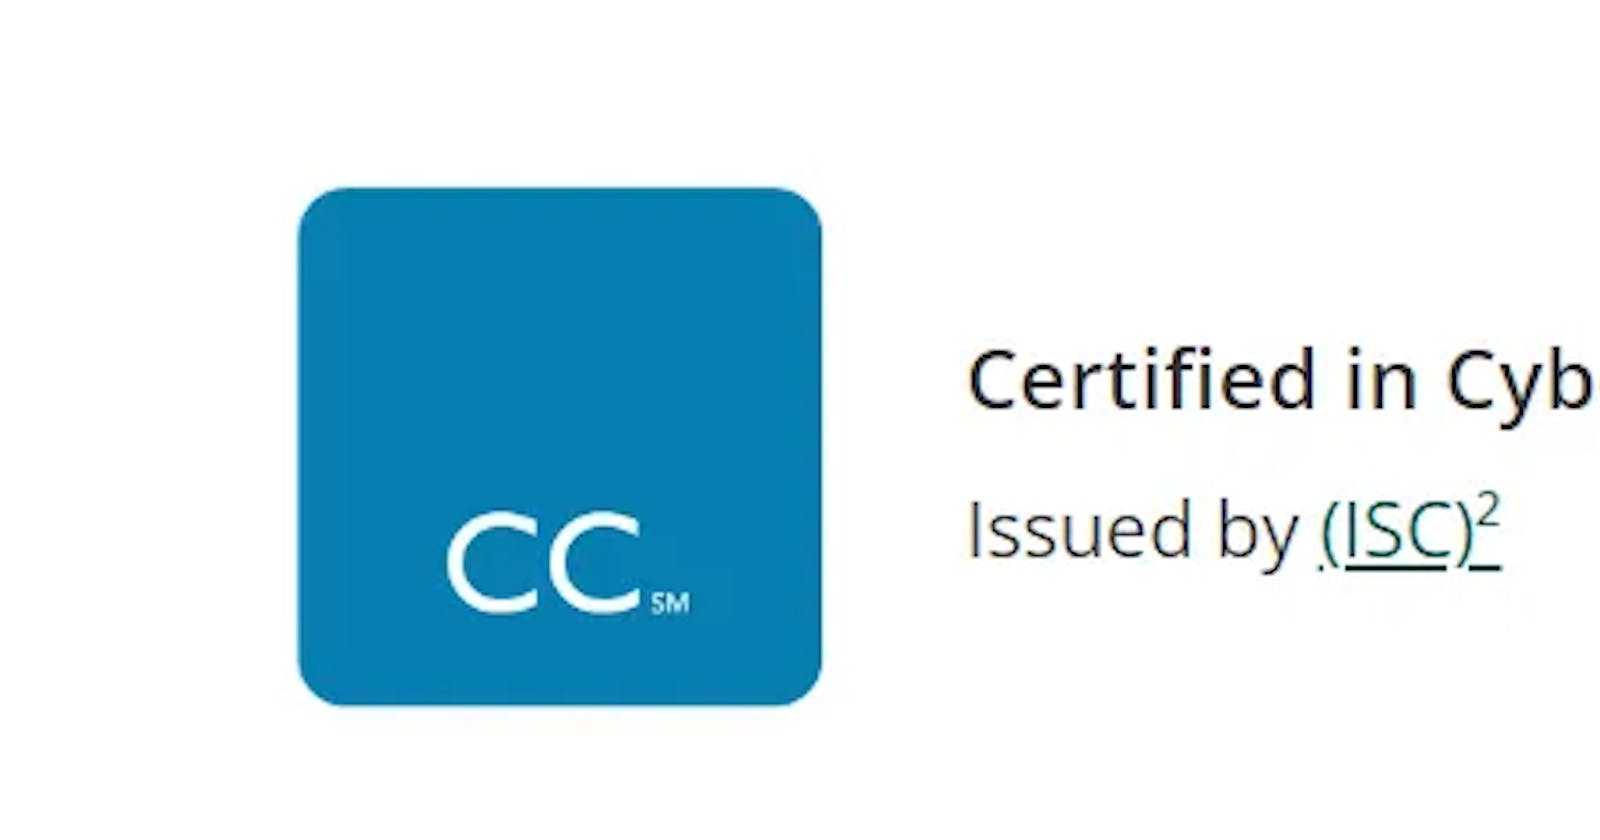 How I Passed the (ISC)² Certified in Cybersecurity (CC) Self-Paced Training!